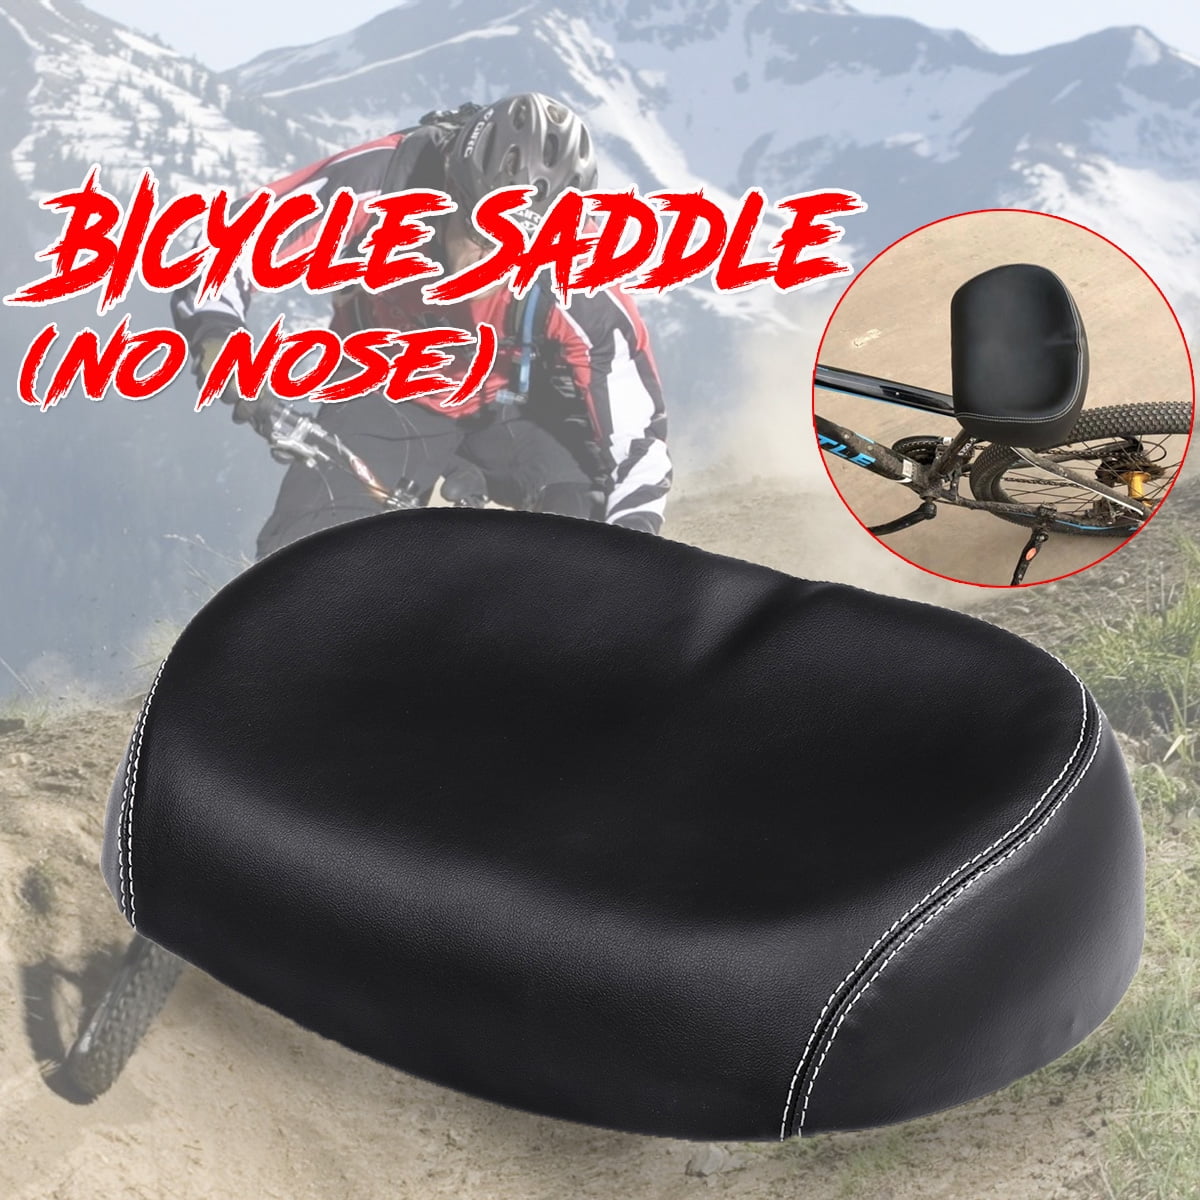 Details about   Comfort Wide Big Bum Saddle Bicycle Seat Padded Mountain Bike Seat w/ Tail Light 